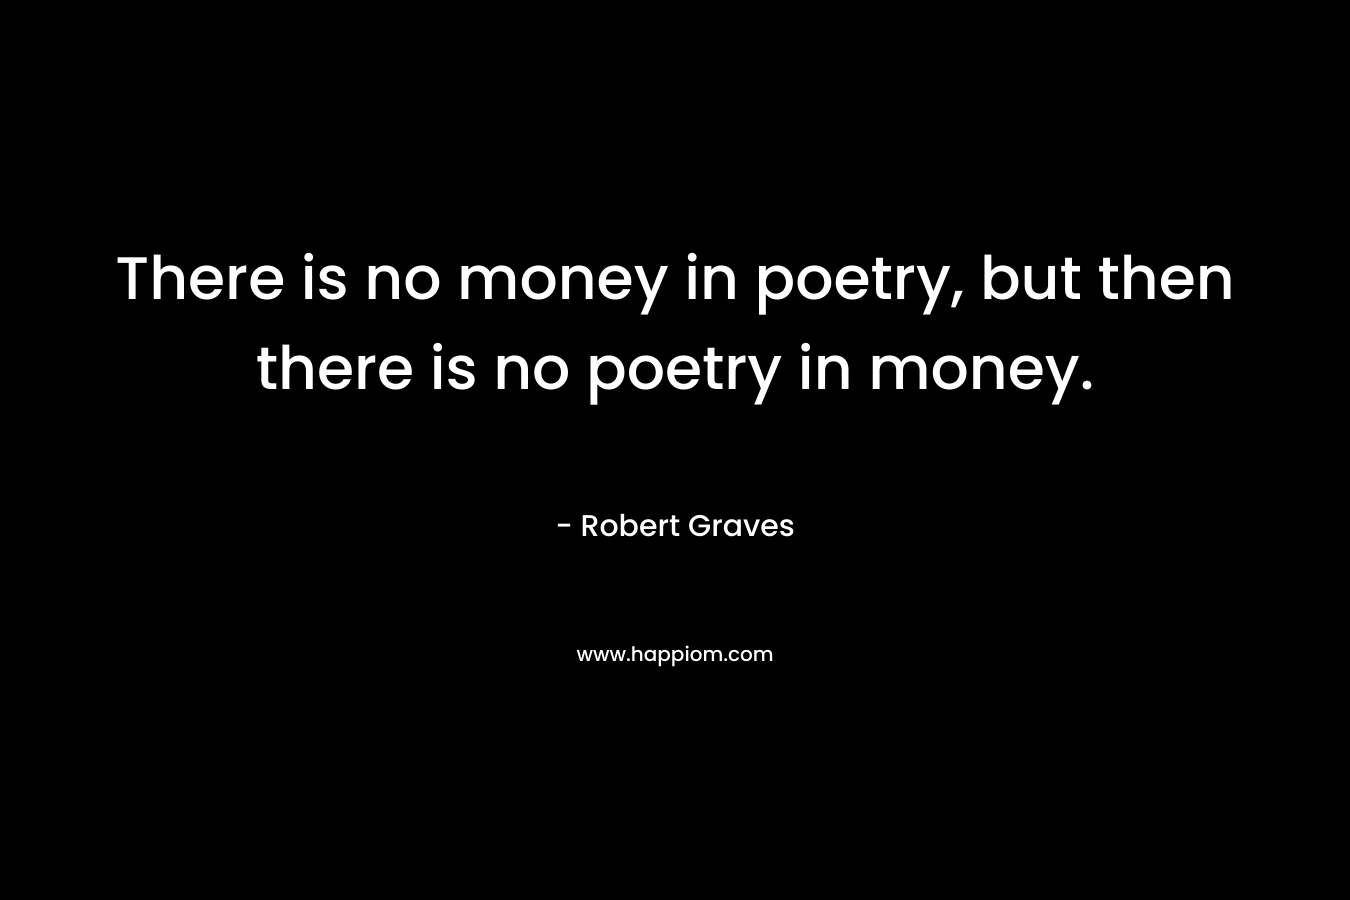 There is no money in poetry, but then there is no poetry in money. – Robert Graves